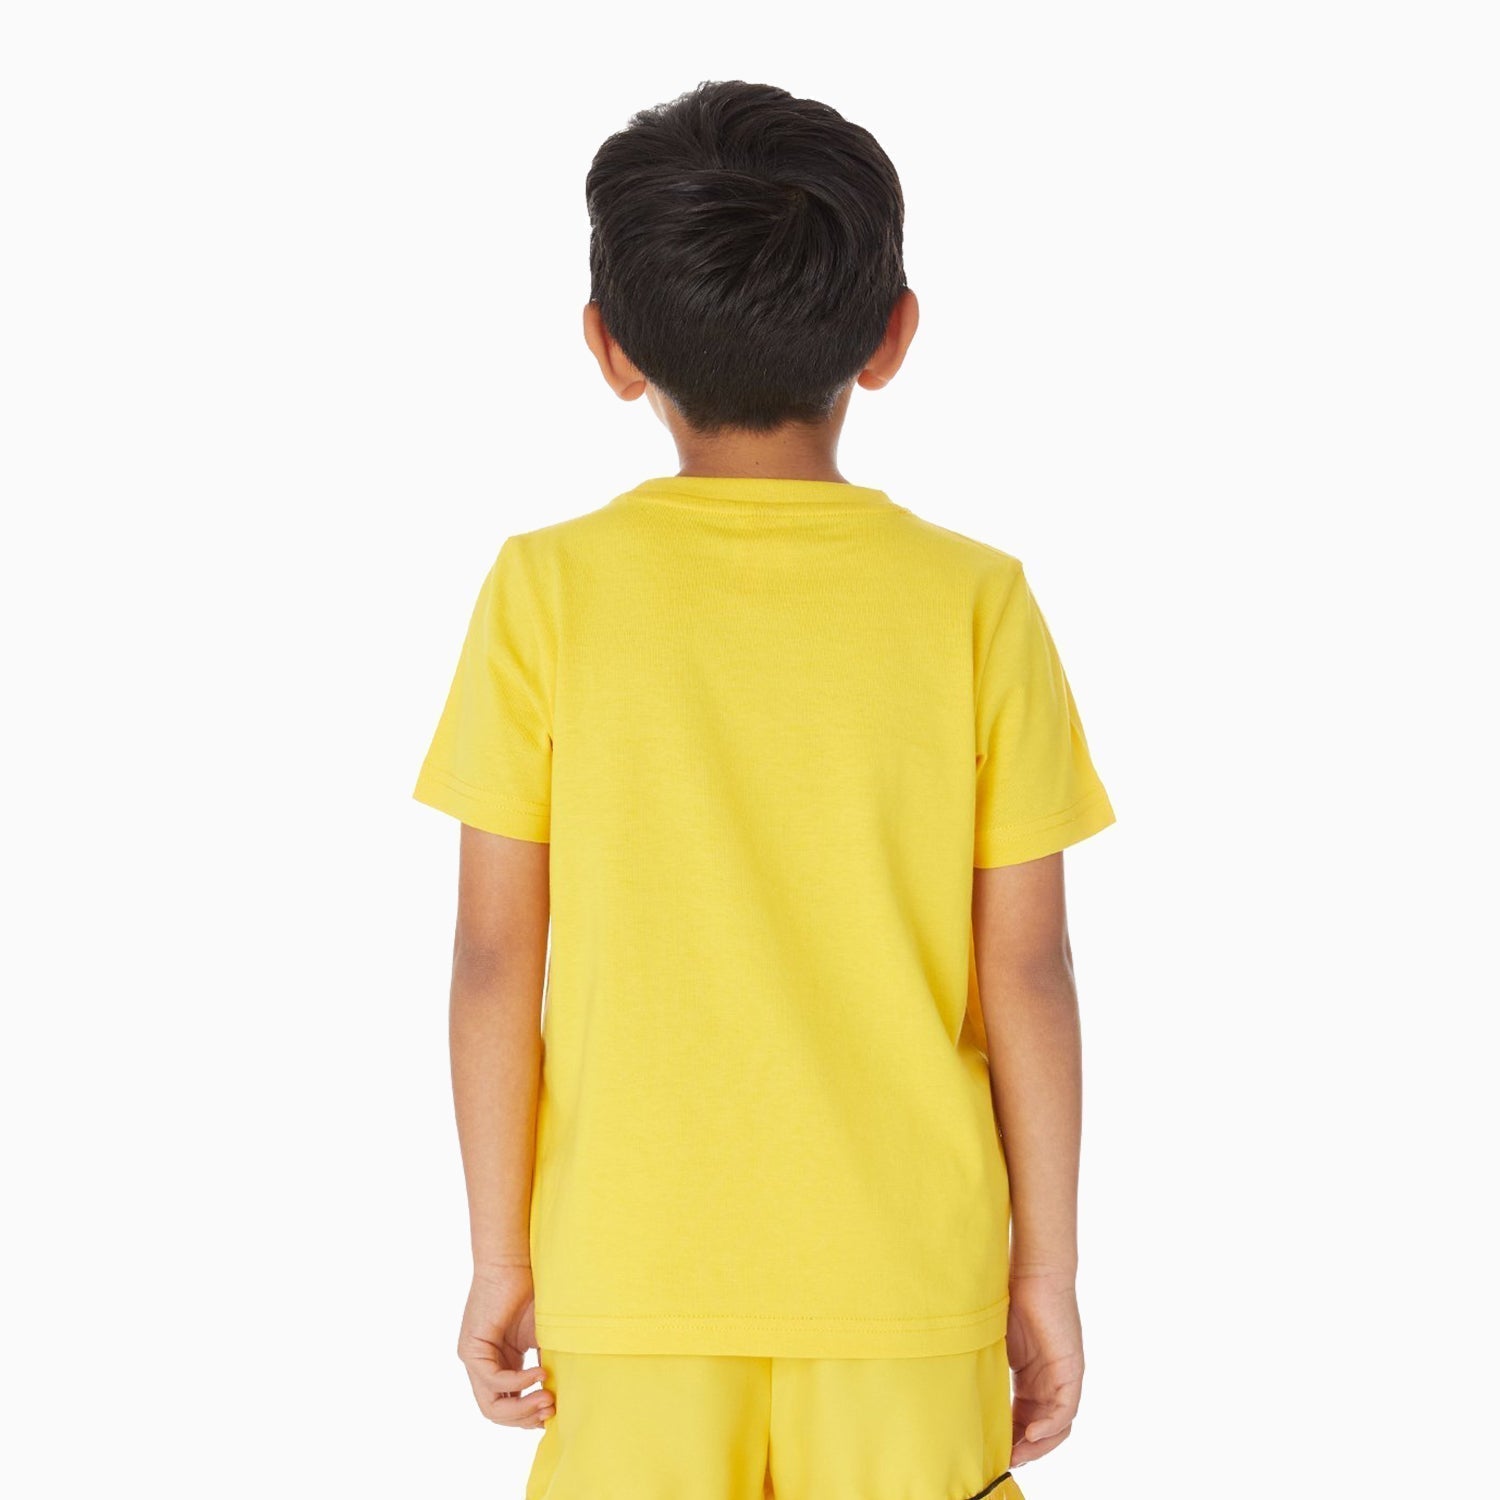 Kappa Kid's Authentic Estessi Outfit - Color: BLACK BLUE YELLOW, RED YELLOW BLUE WHITE, WHITE BLUE ASTER YELLOW, YELLOW VIOLET WHITE BLACK - Kids Premium Clothing -